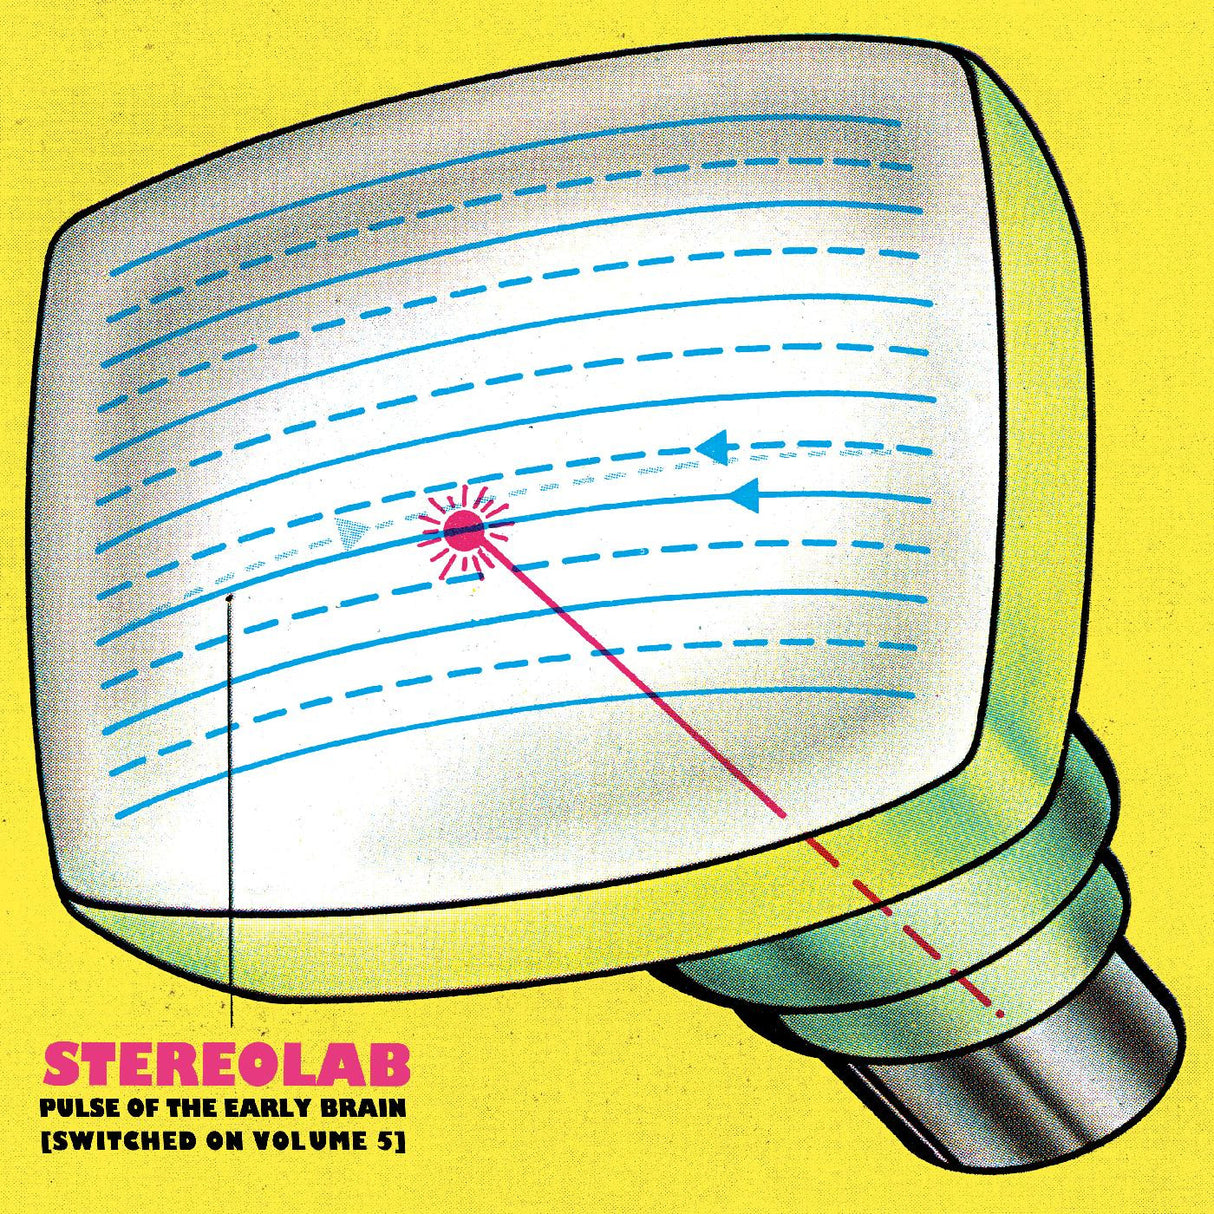 Stereolab Pulse Of The Early Brain: Switched On Volume 5 [3LP] [Vinyl]